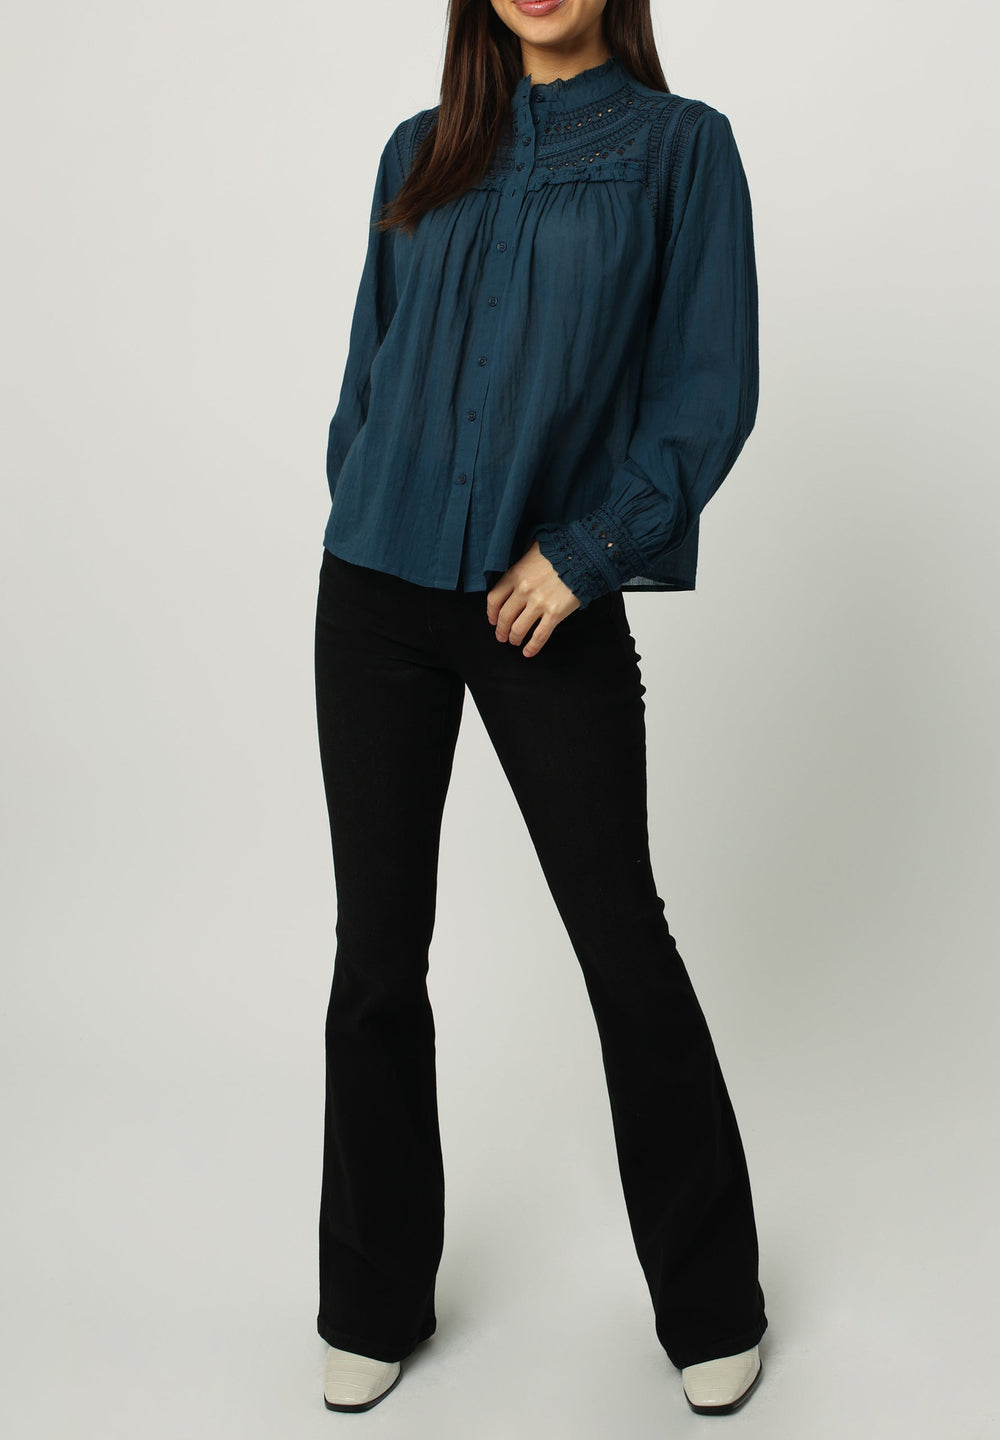 image of a female model wearing a KELLY EMBROIDERY DETAIL SHIRT FRENCH NAVY DEAR JOHN DENIM 